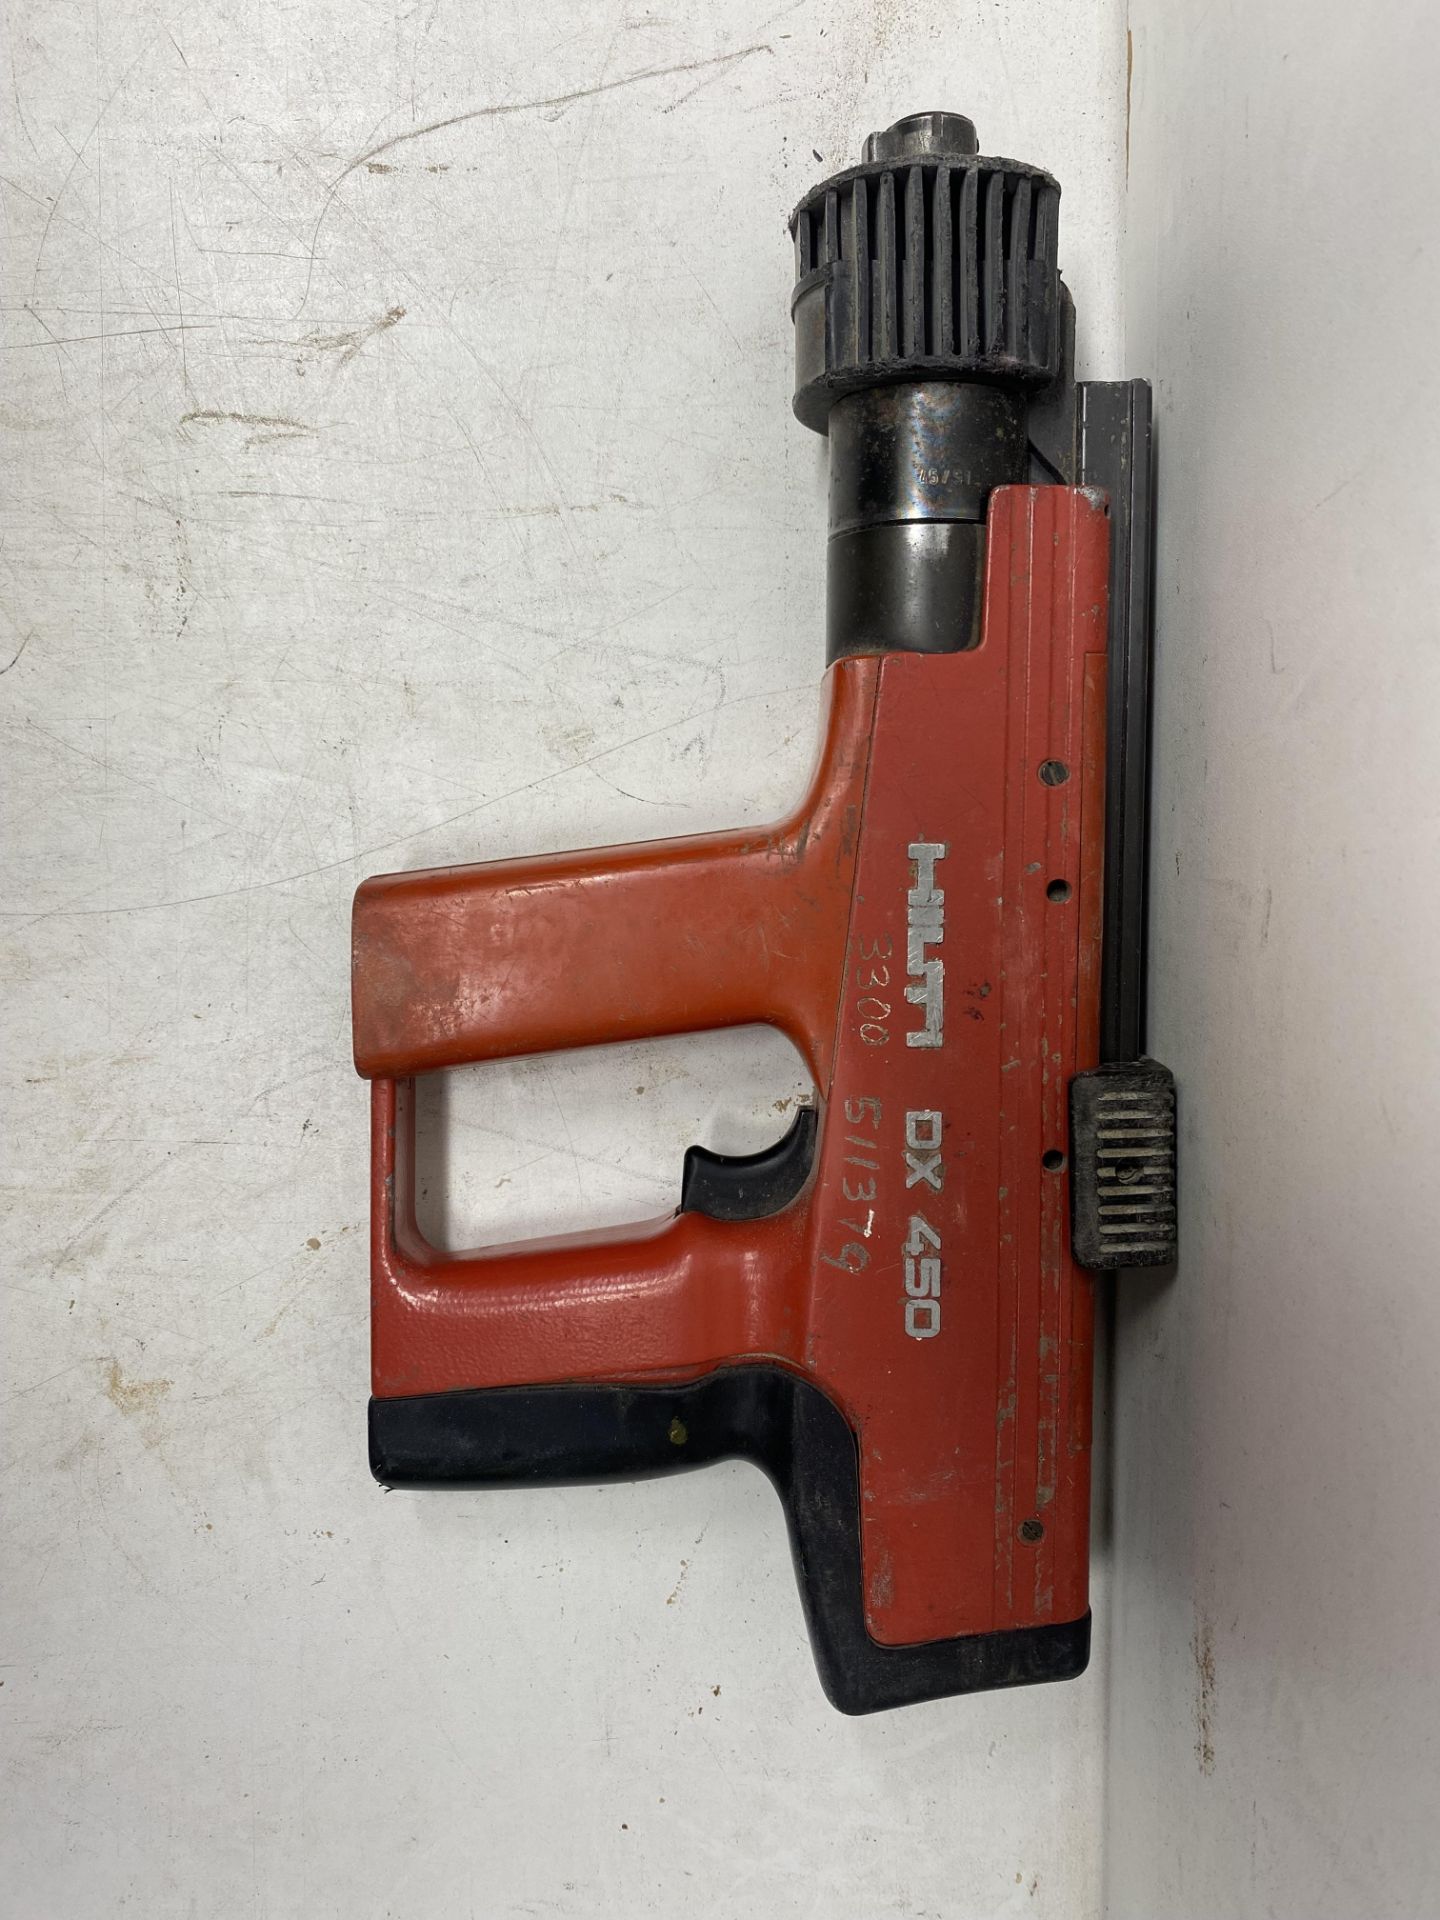 Hilti Dx450 Cordless Power Actuated Nail Gun - Image 2 of 9